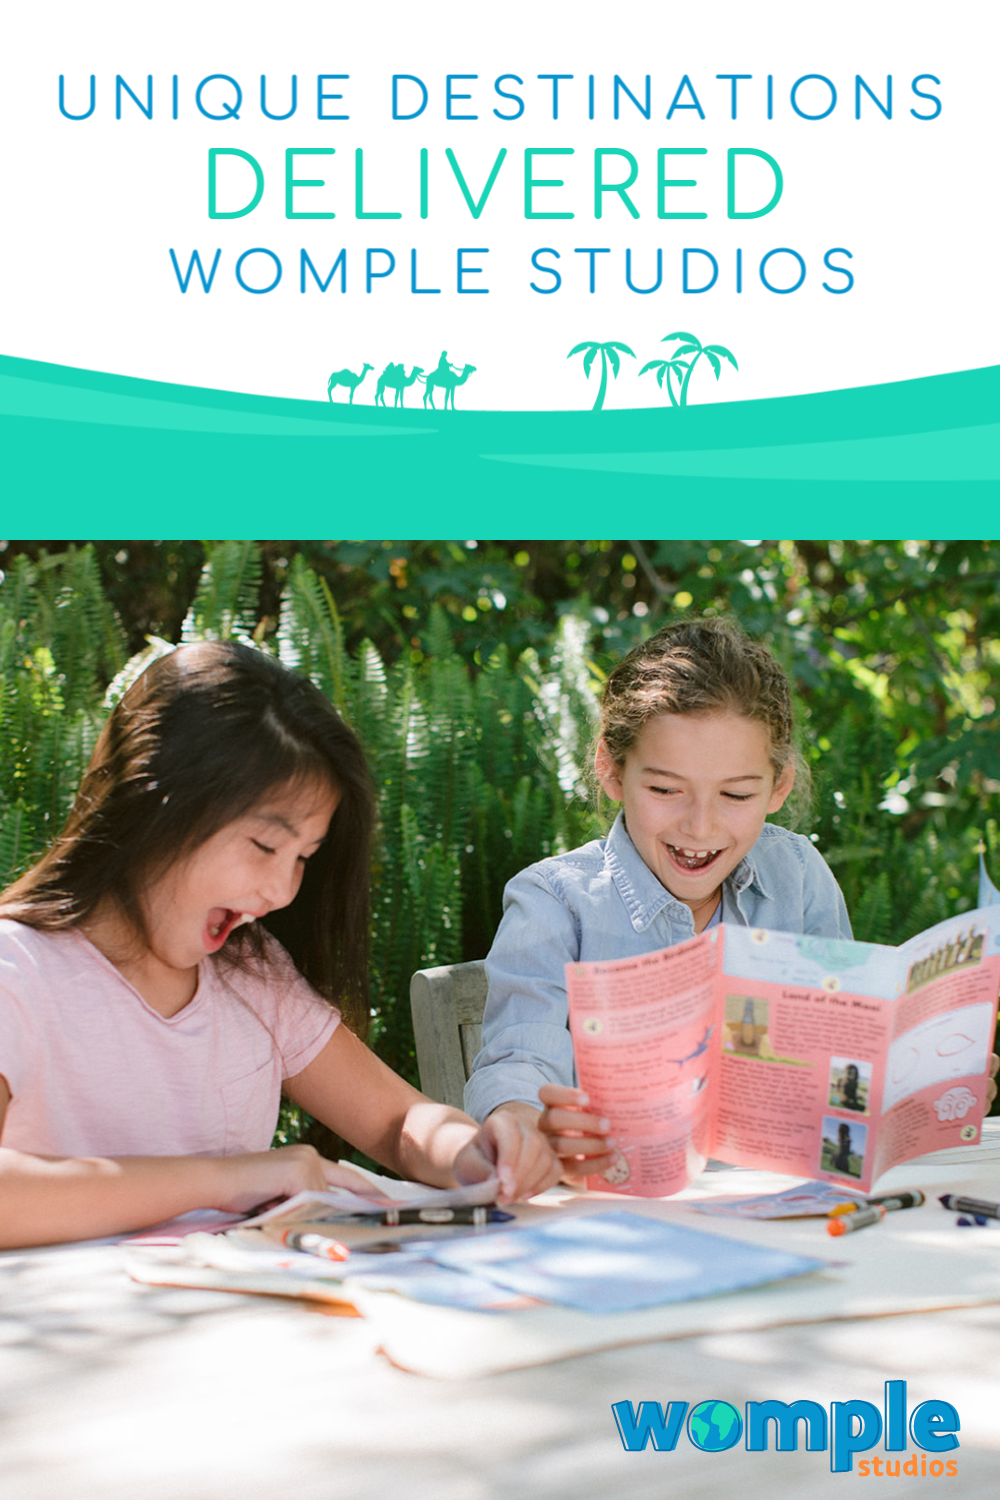 WompleMail by Womple Studios. Learn about Unique Destinations 2x a Month!!! TWO DELIVERIES EACH MONTH!! #WompleMail #WompleStudios